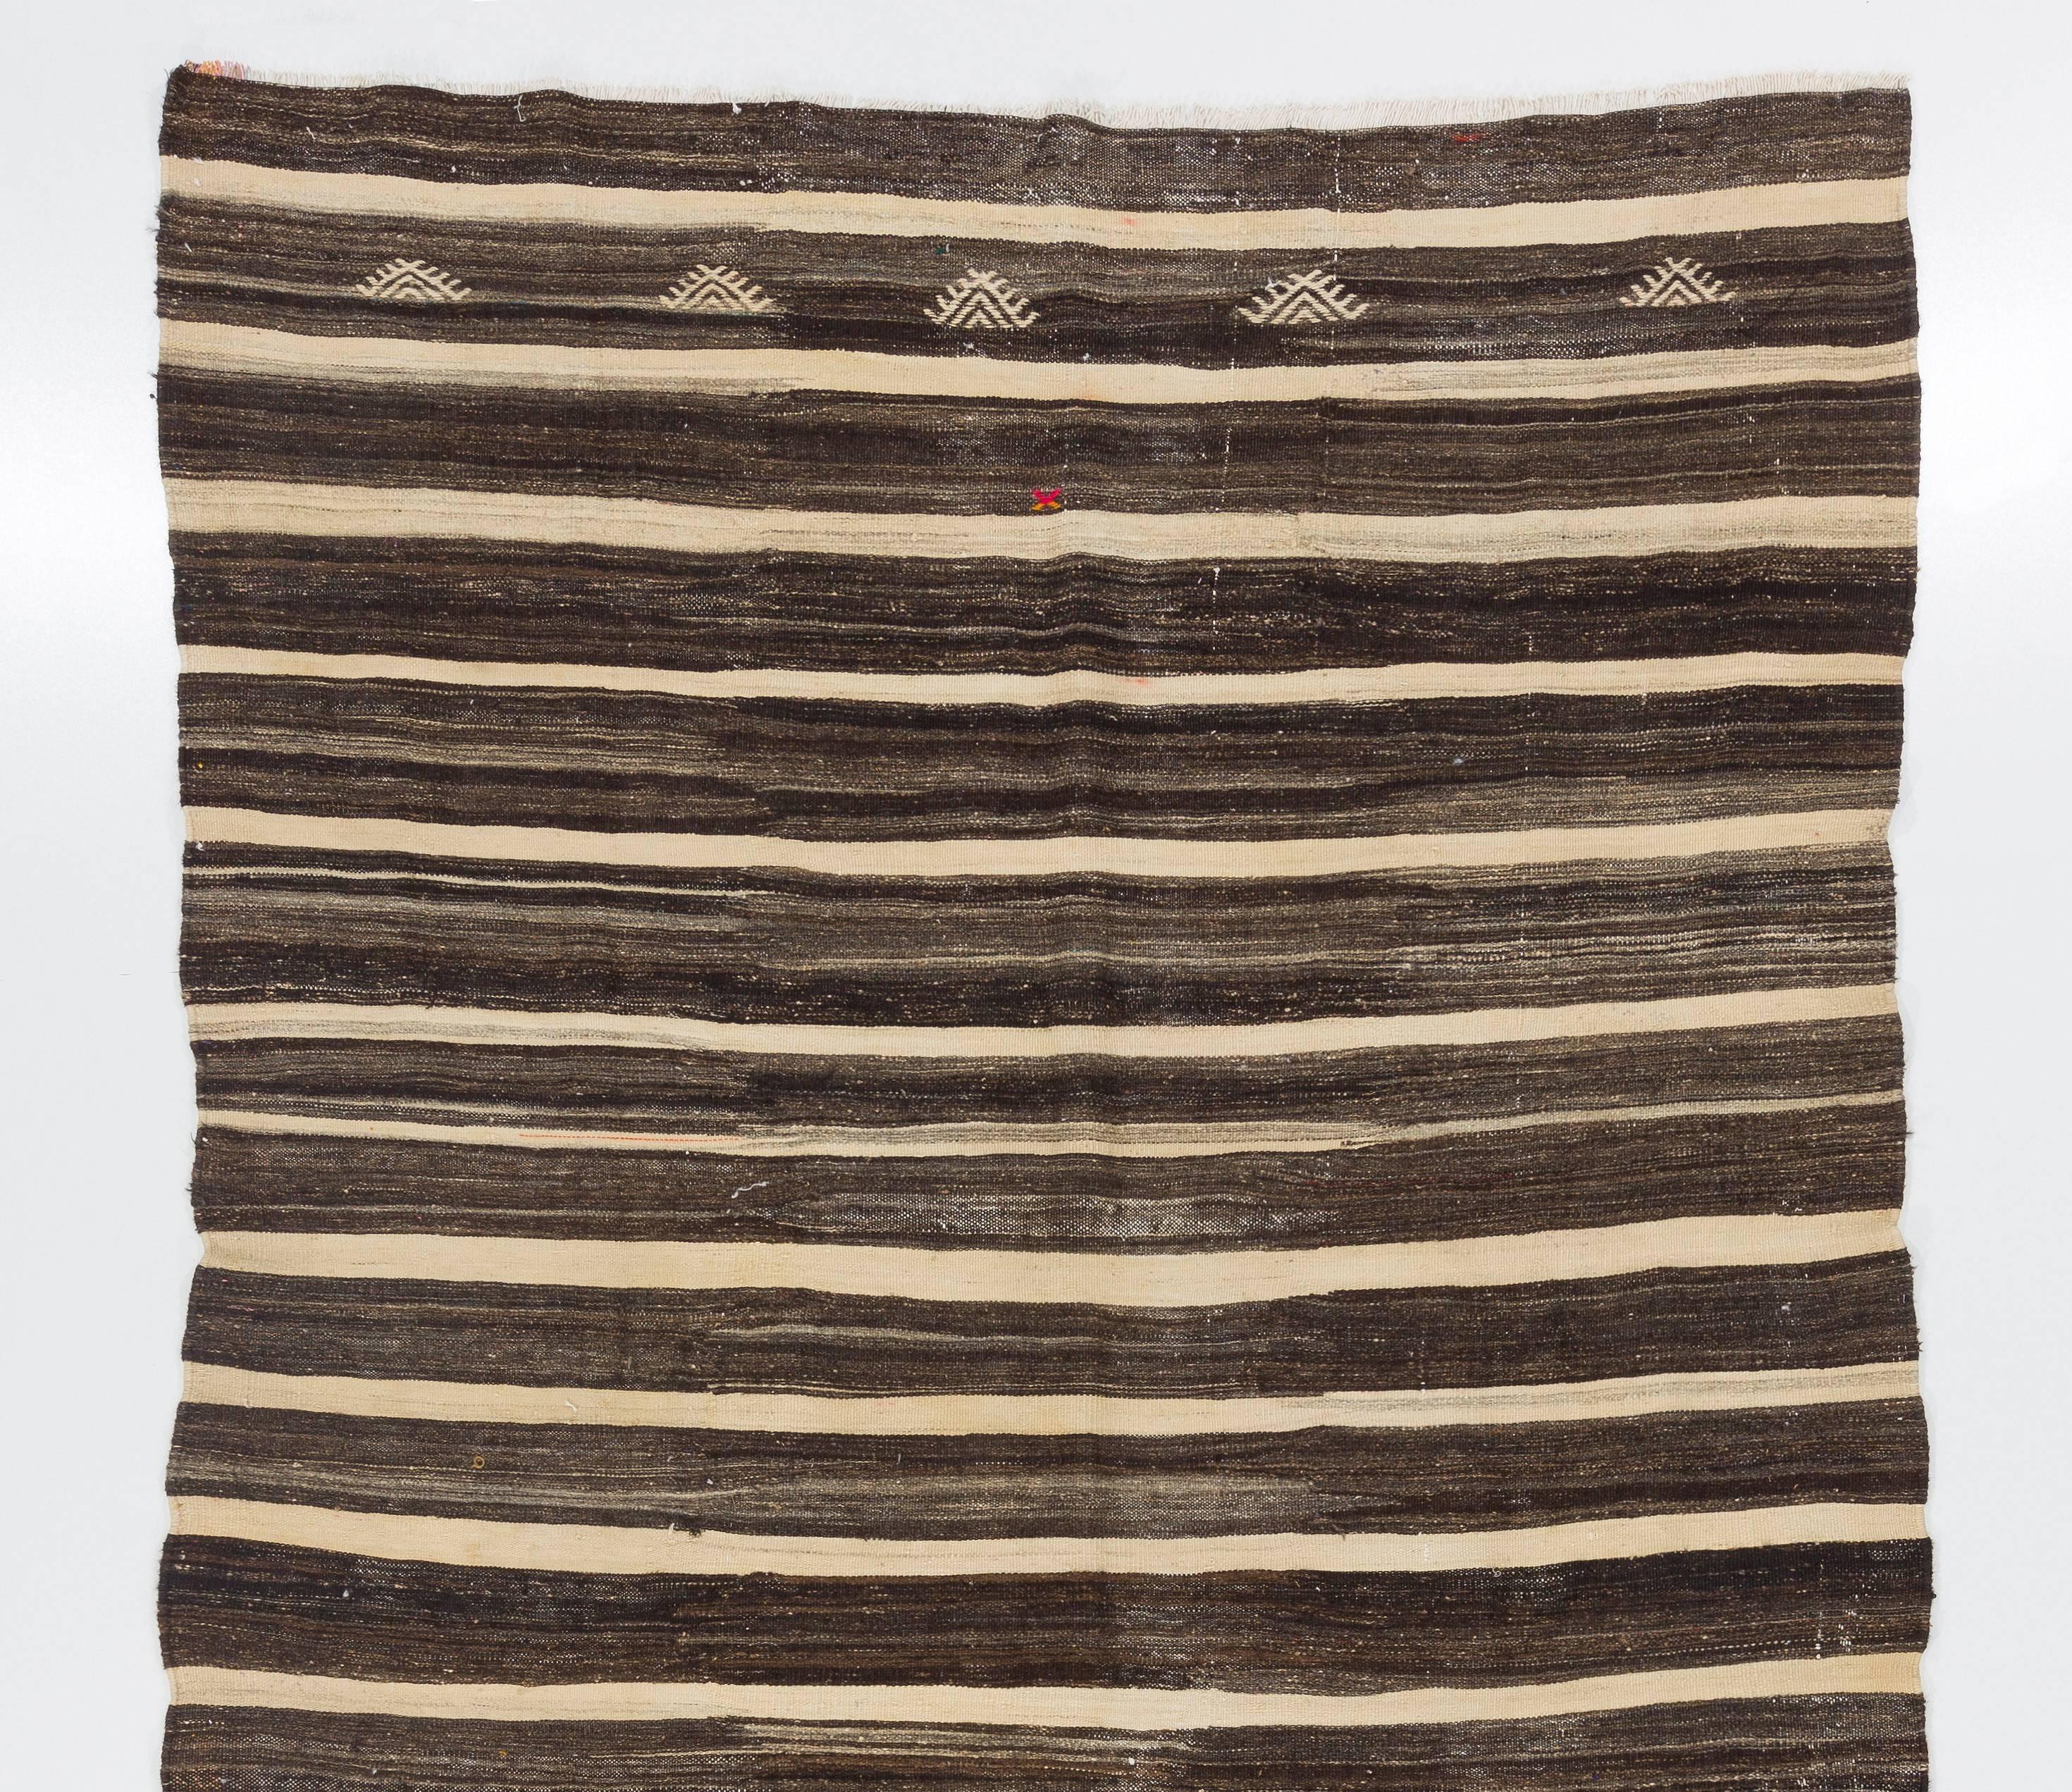 A vintage striped Anatolian Kilim made of natural un-dyed wool, featuring beautifully abrashed tones of cream and brown. Measures: 6.8 x 11.2 ft.
A fitting accompaniment to modern and Minimalist interiors in well preserved condition.
Sturdy and